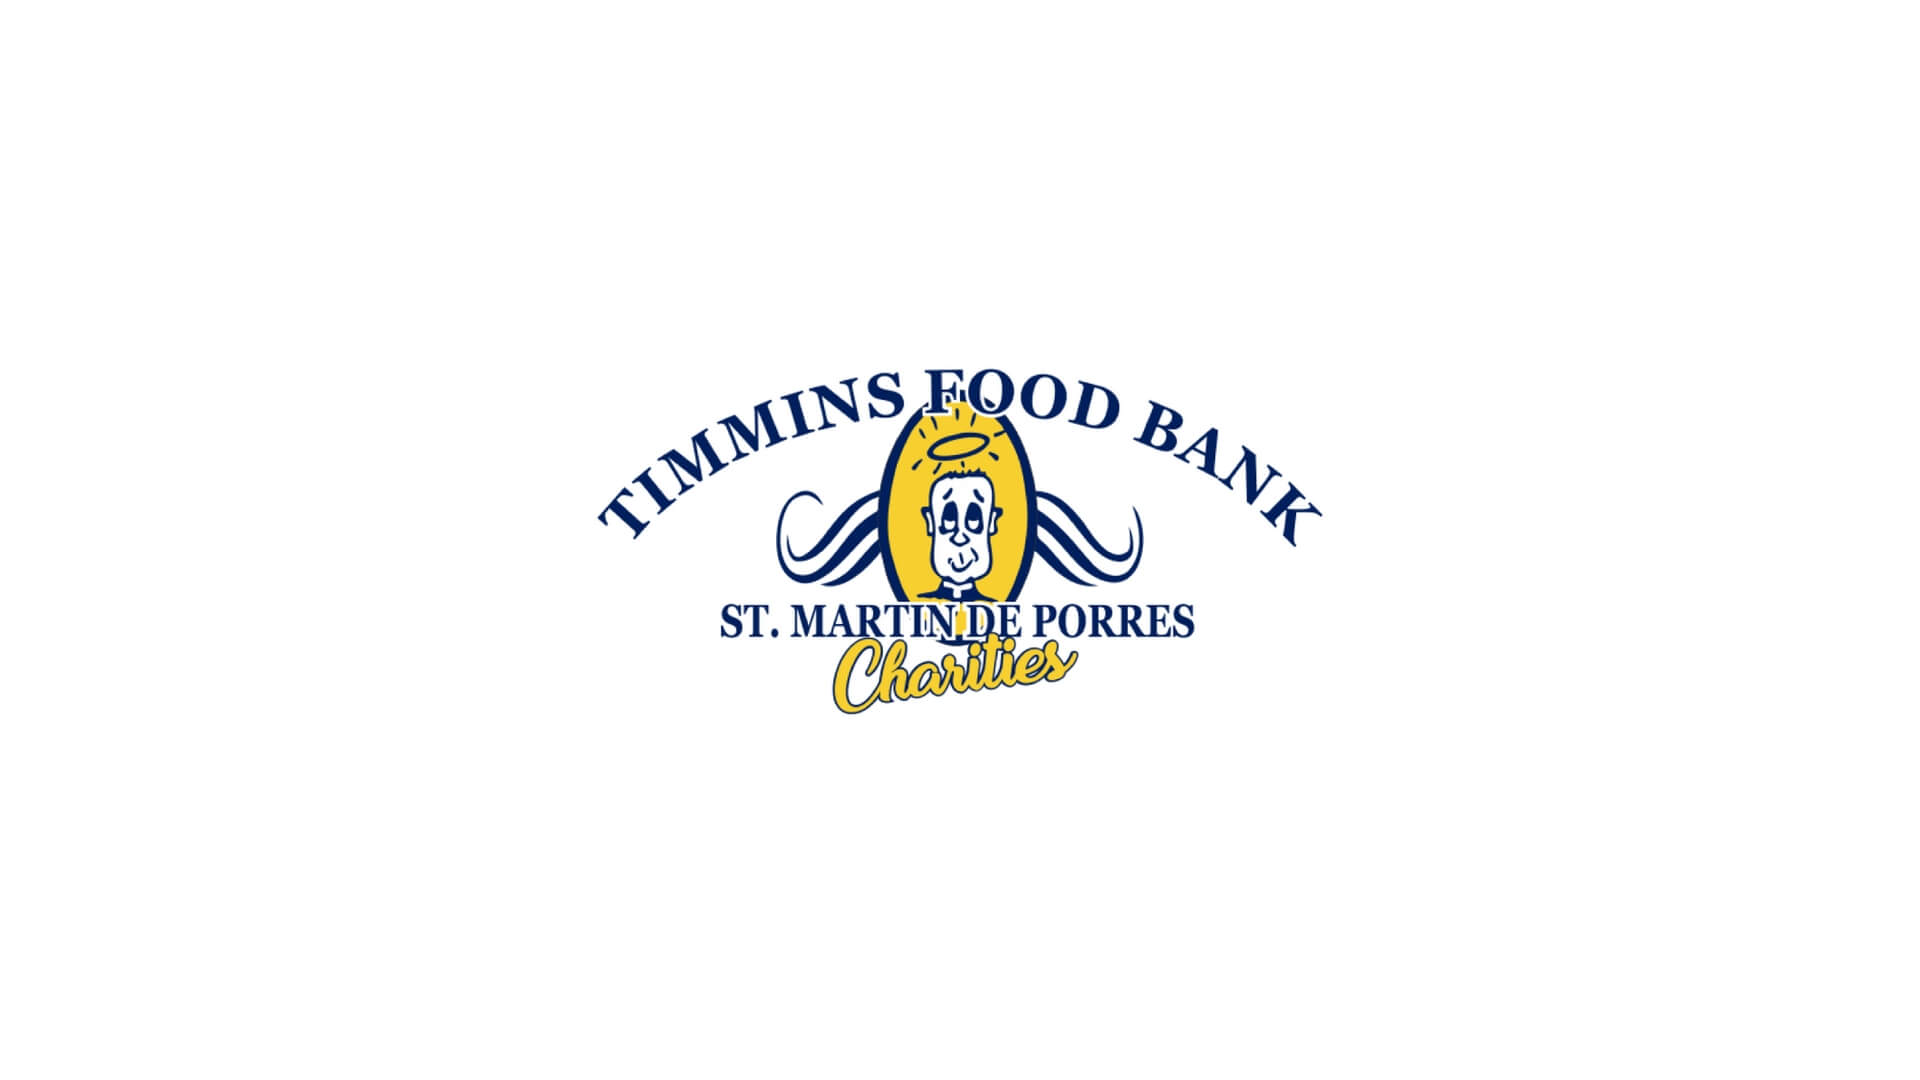 Timmins Care Logo of timmins food bank, st. martin de porres charities, featuring text and an illustration of a smiling figure wearing a hood. Cochrane District Social Services Administration Board